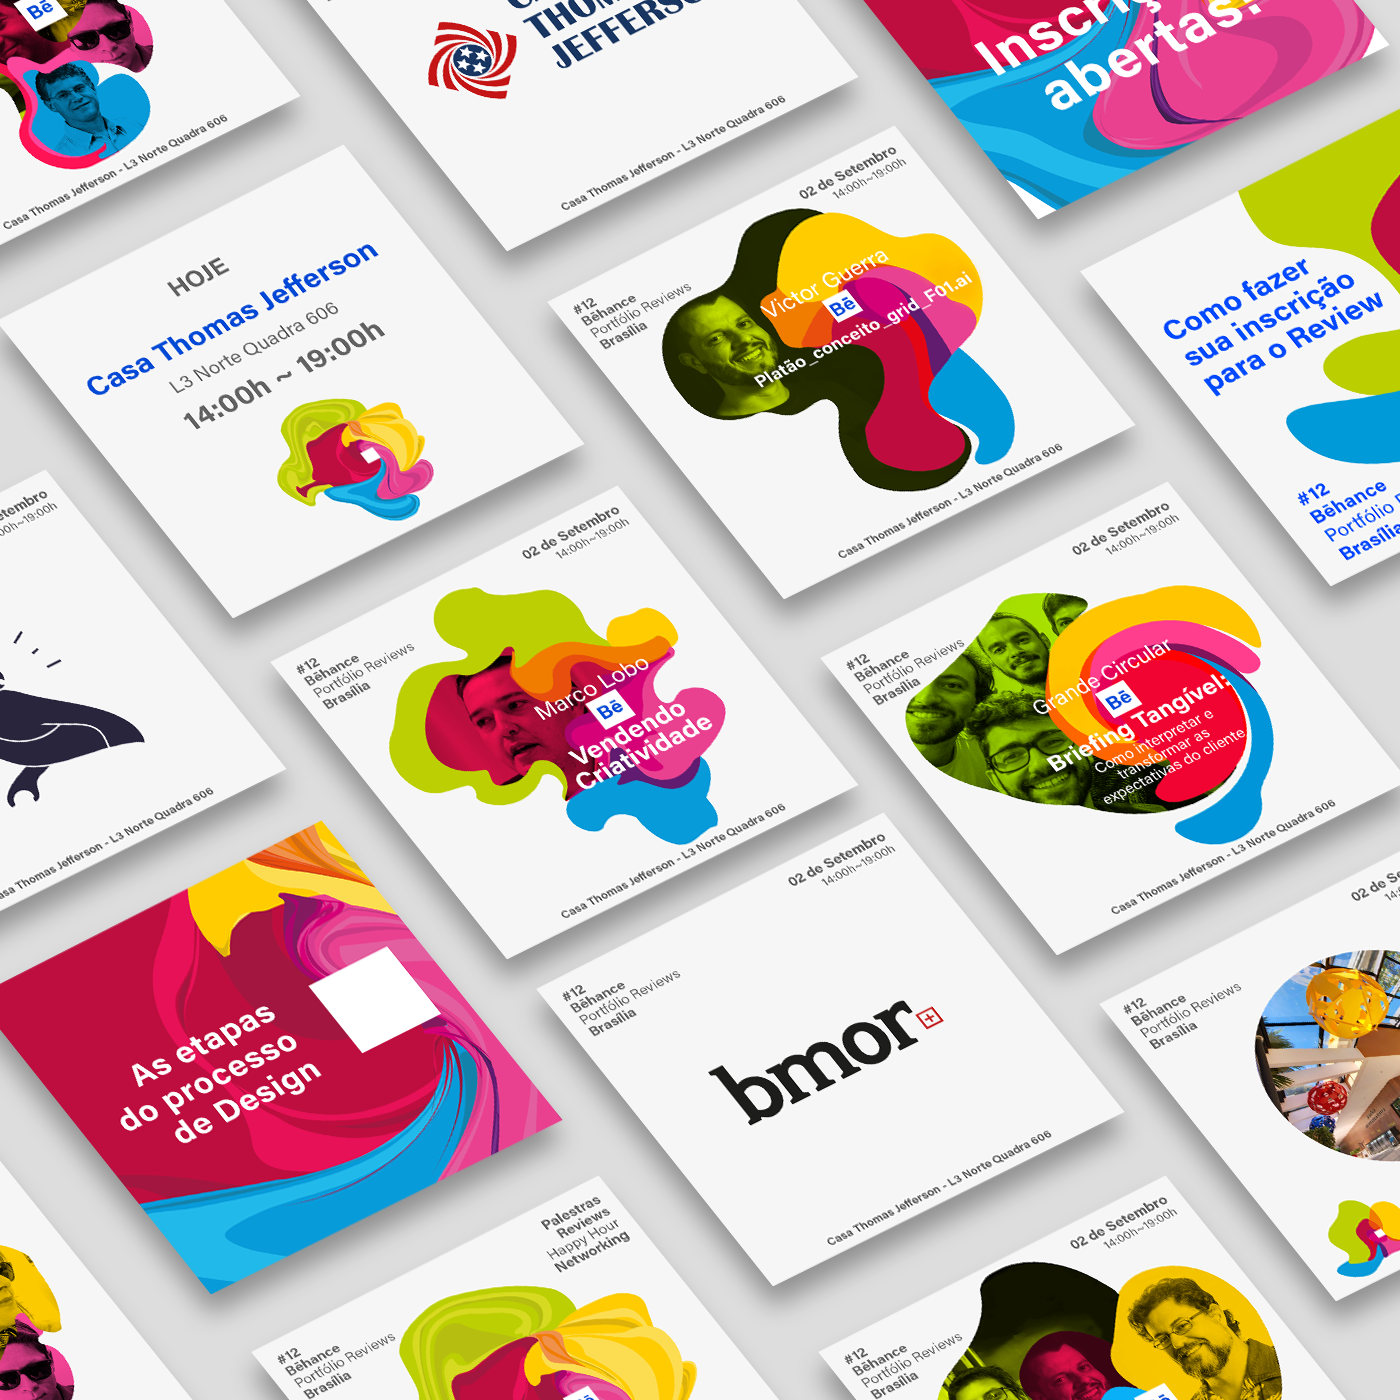 Behance reviews Event design logo colorful poster conference color map